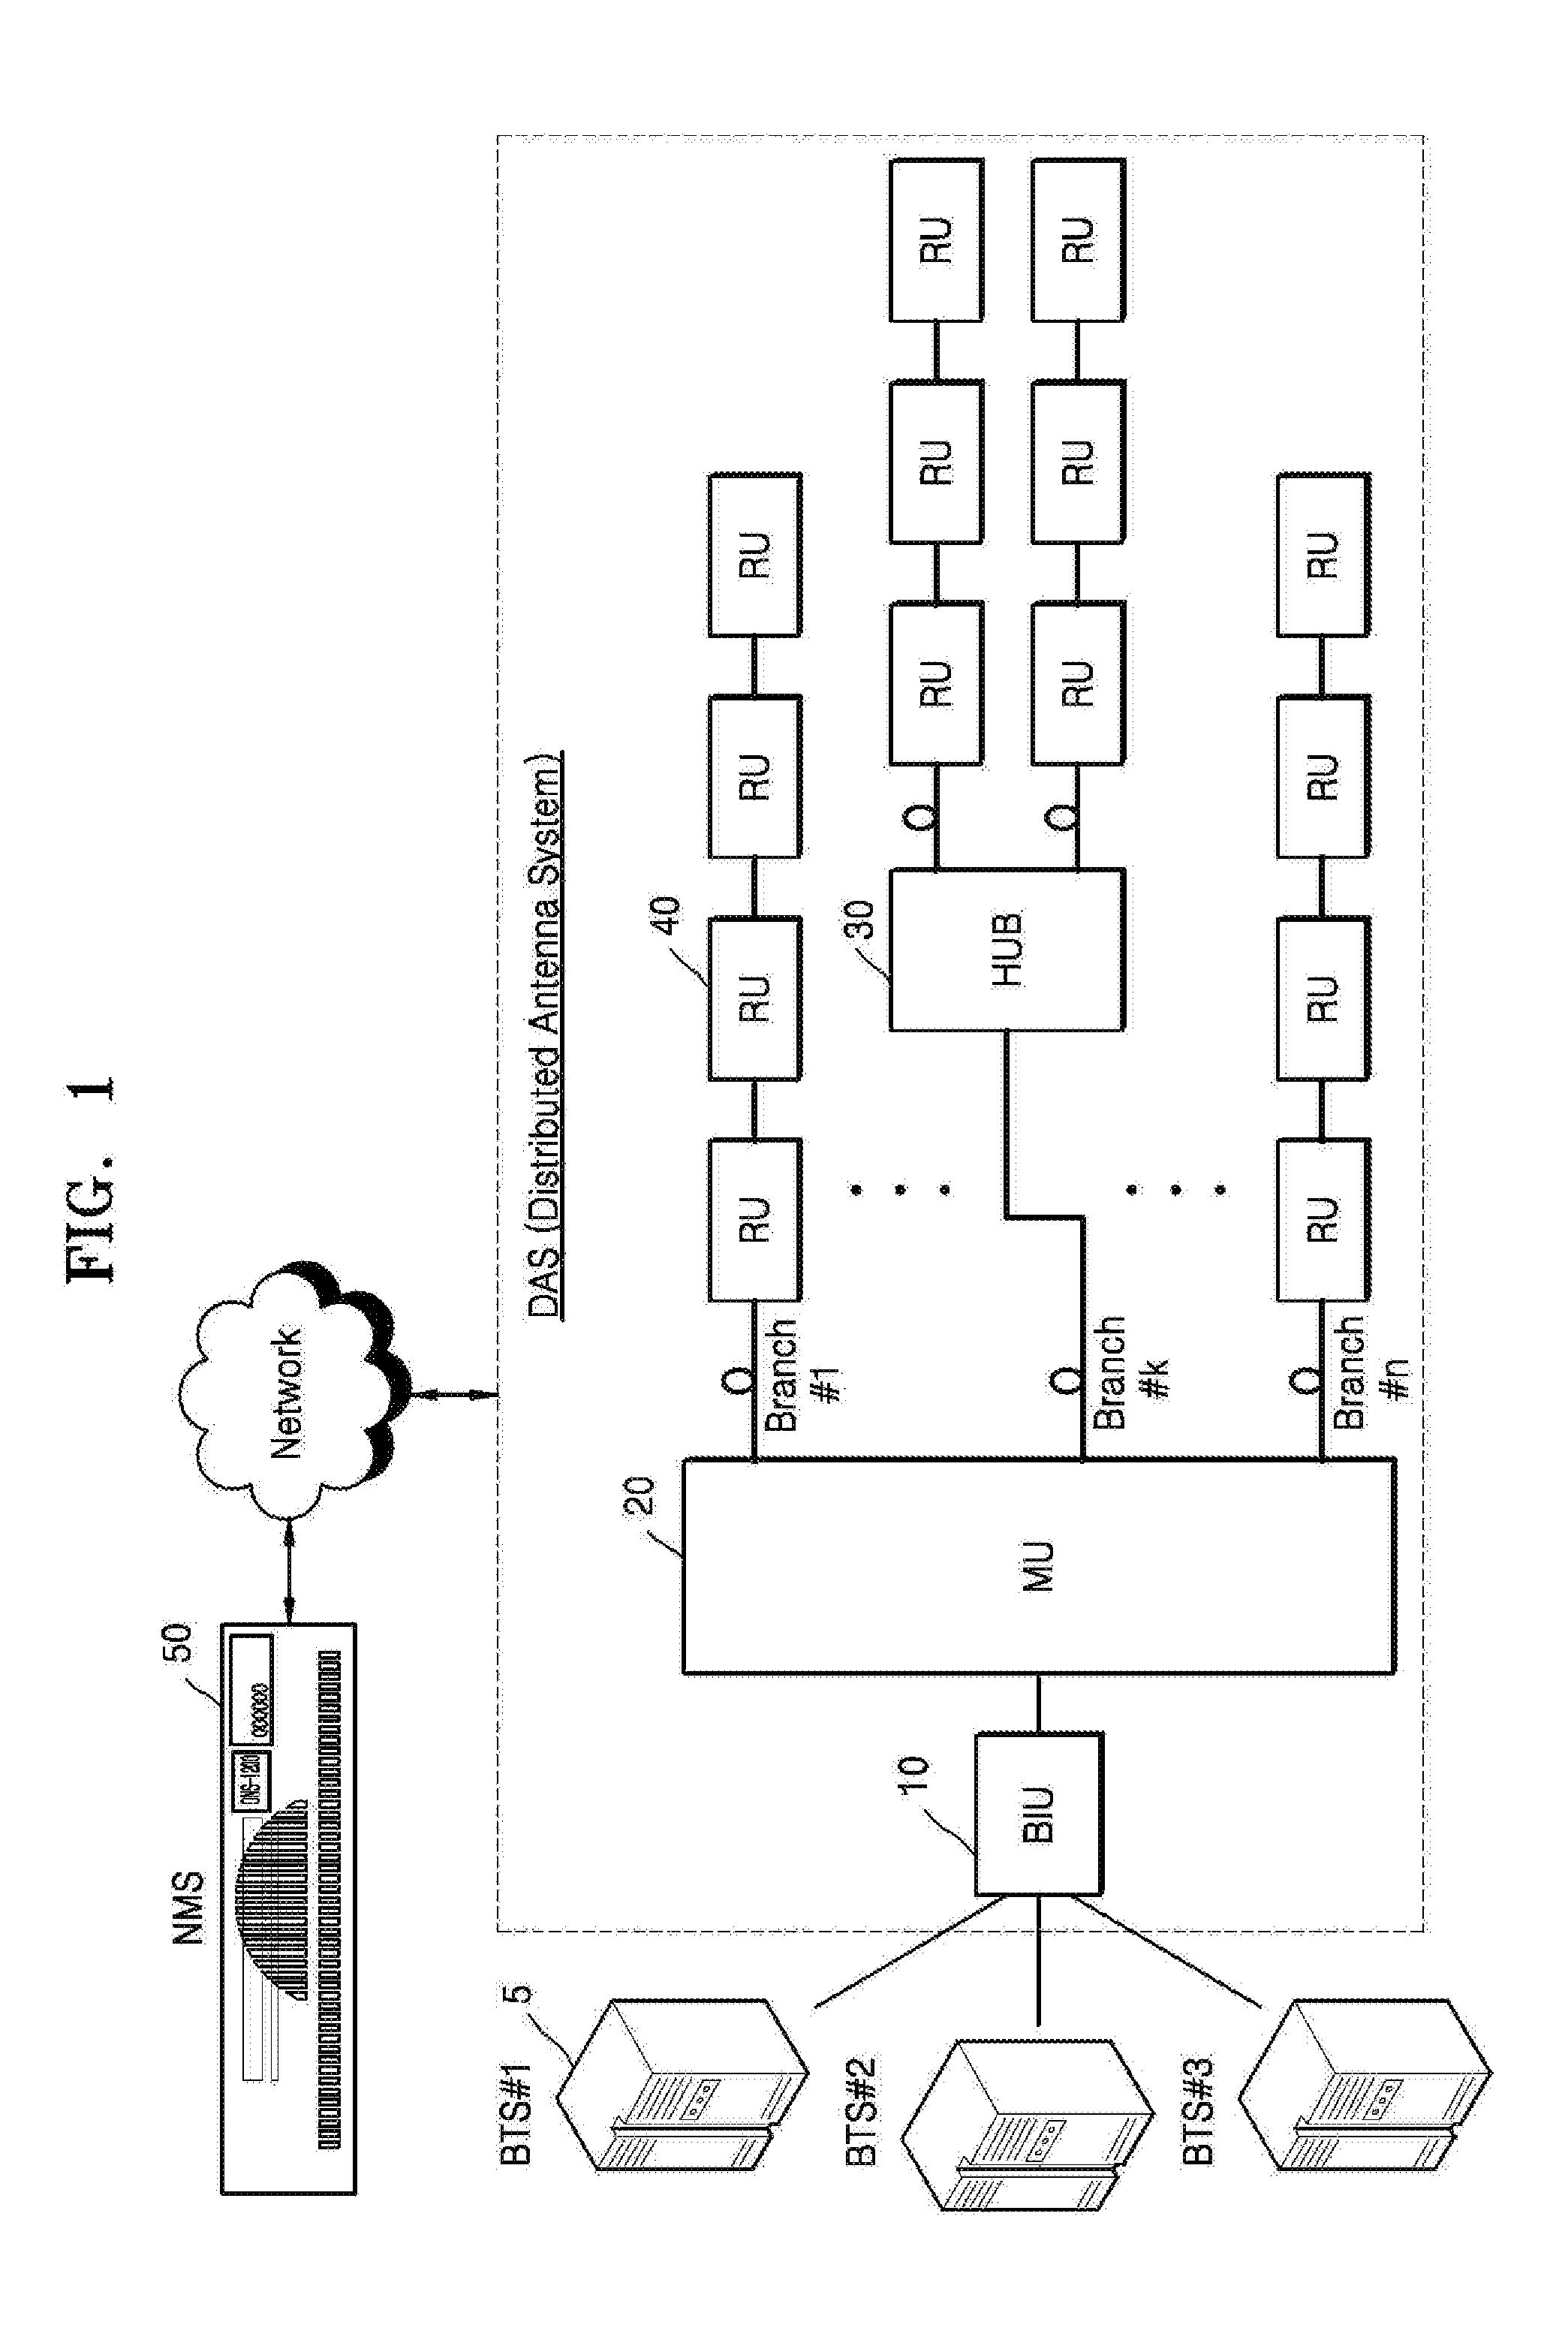 Digital data transmission in distributed antenna system